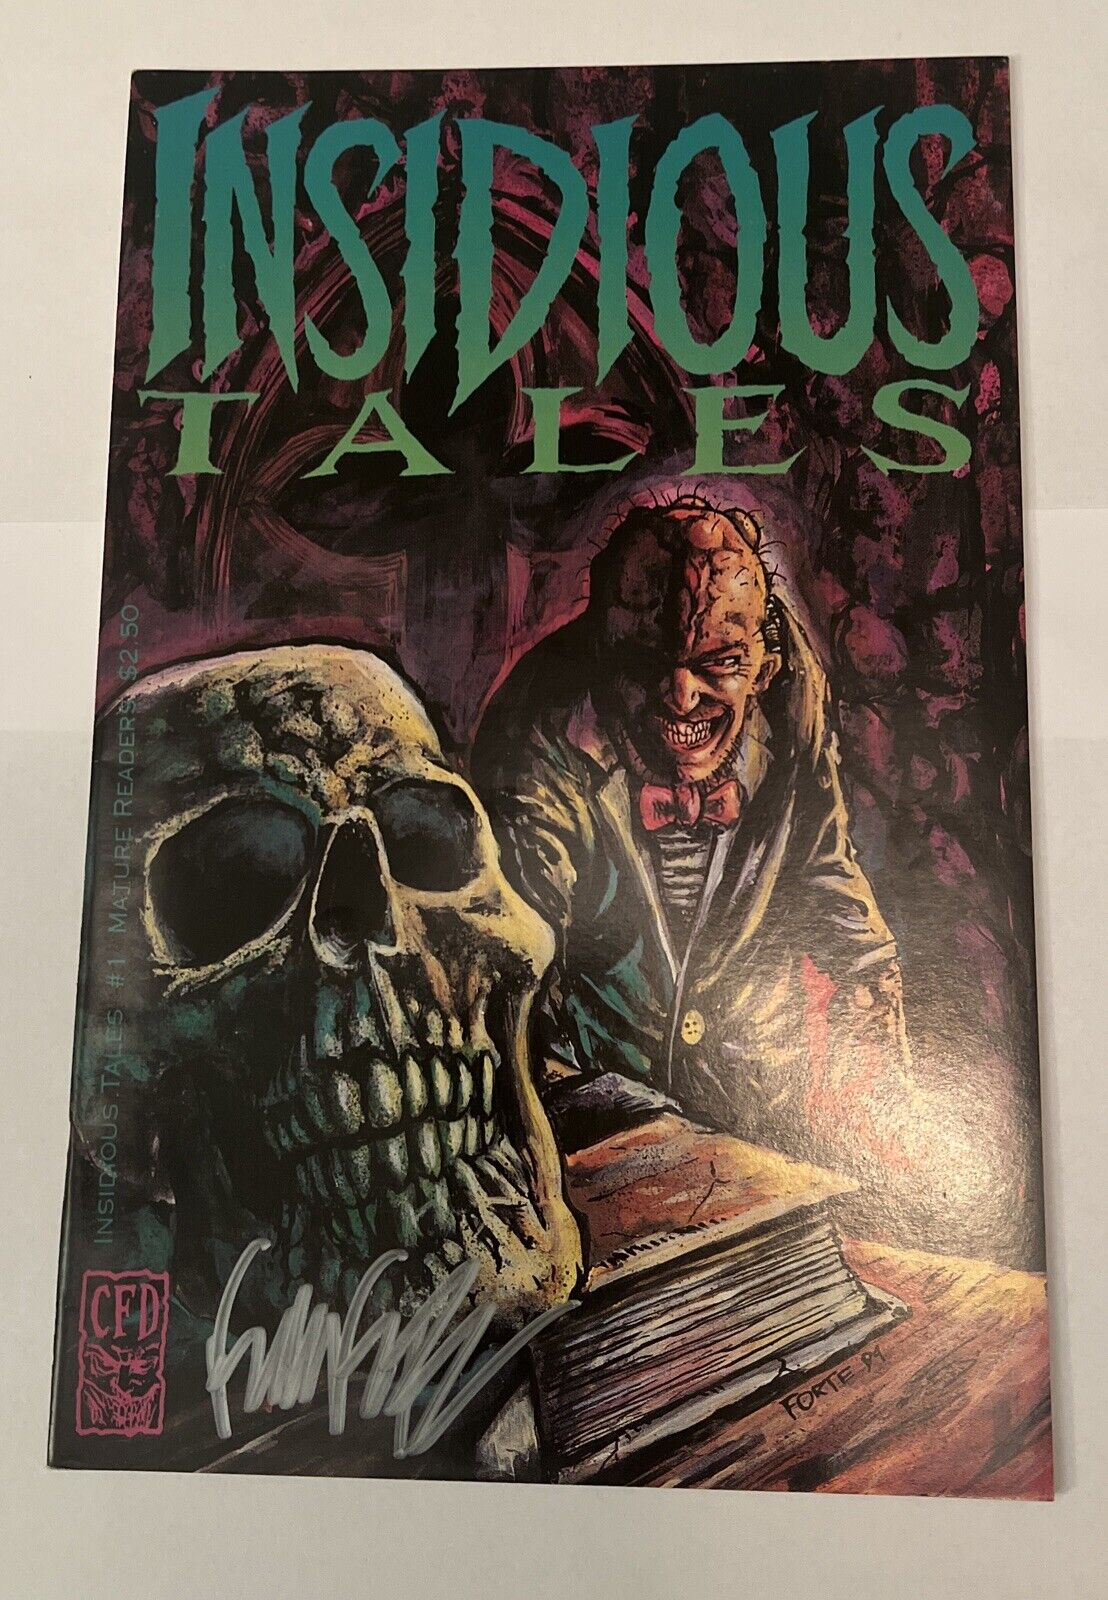 Insidious Tales #1 VF/NM Signed By Frank Forte CFD Horror Anthology Lovecraft